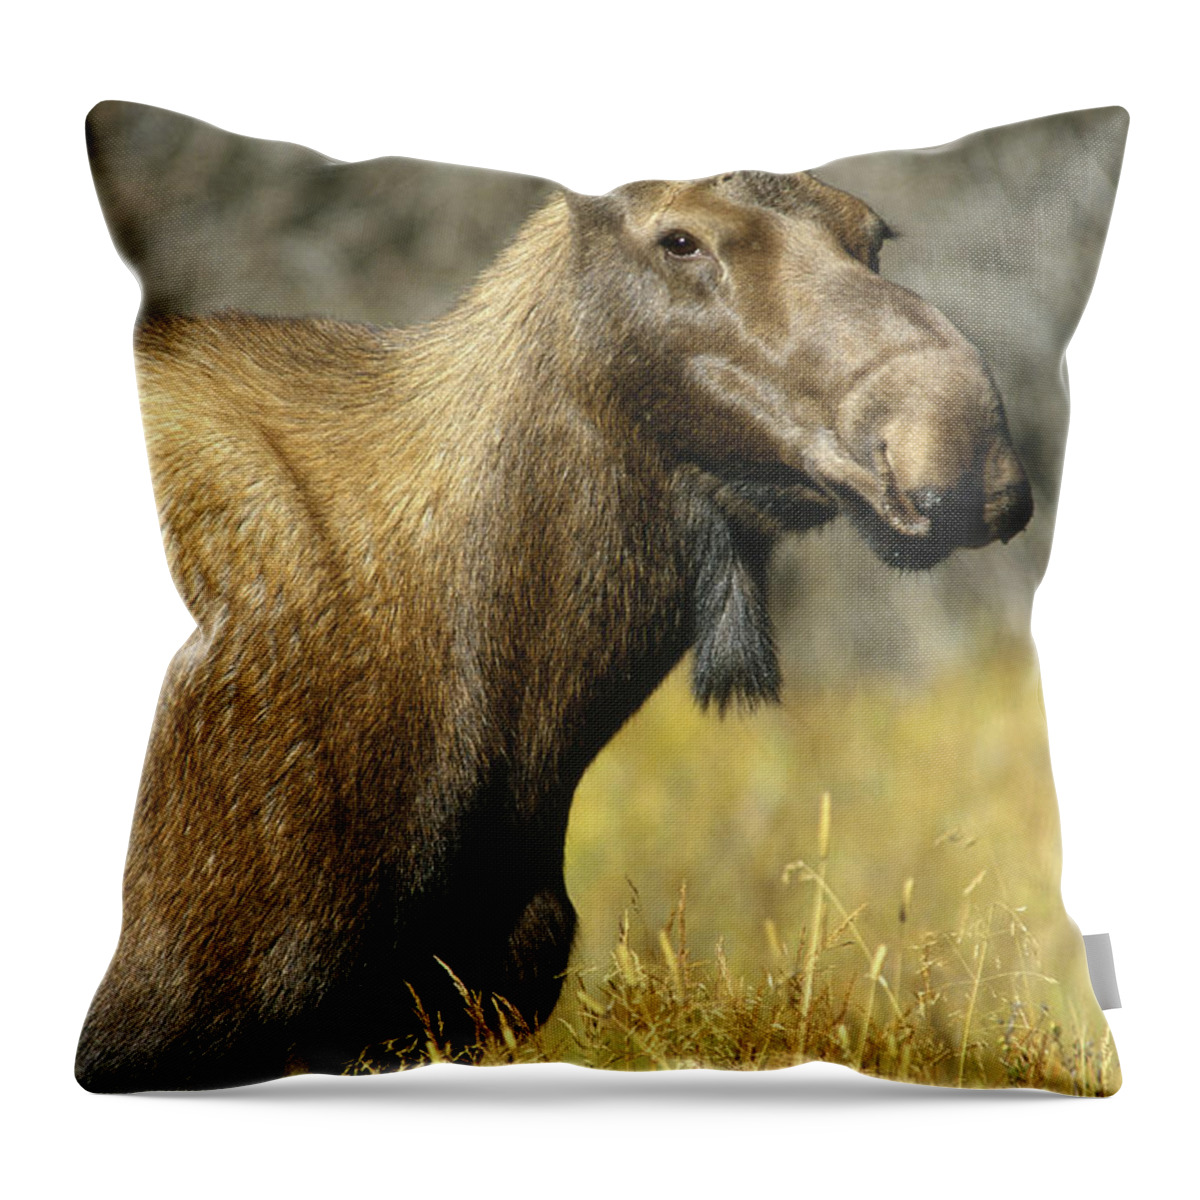 Feb0514 Throw Pillow featuring the photograph Moose Female North America by Tim Fitzharris